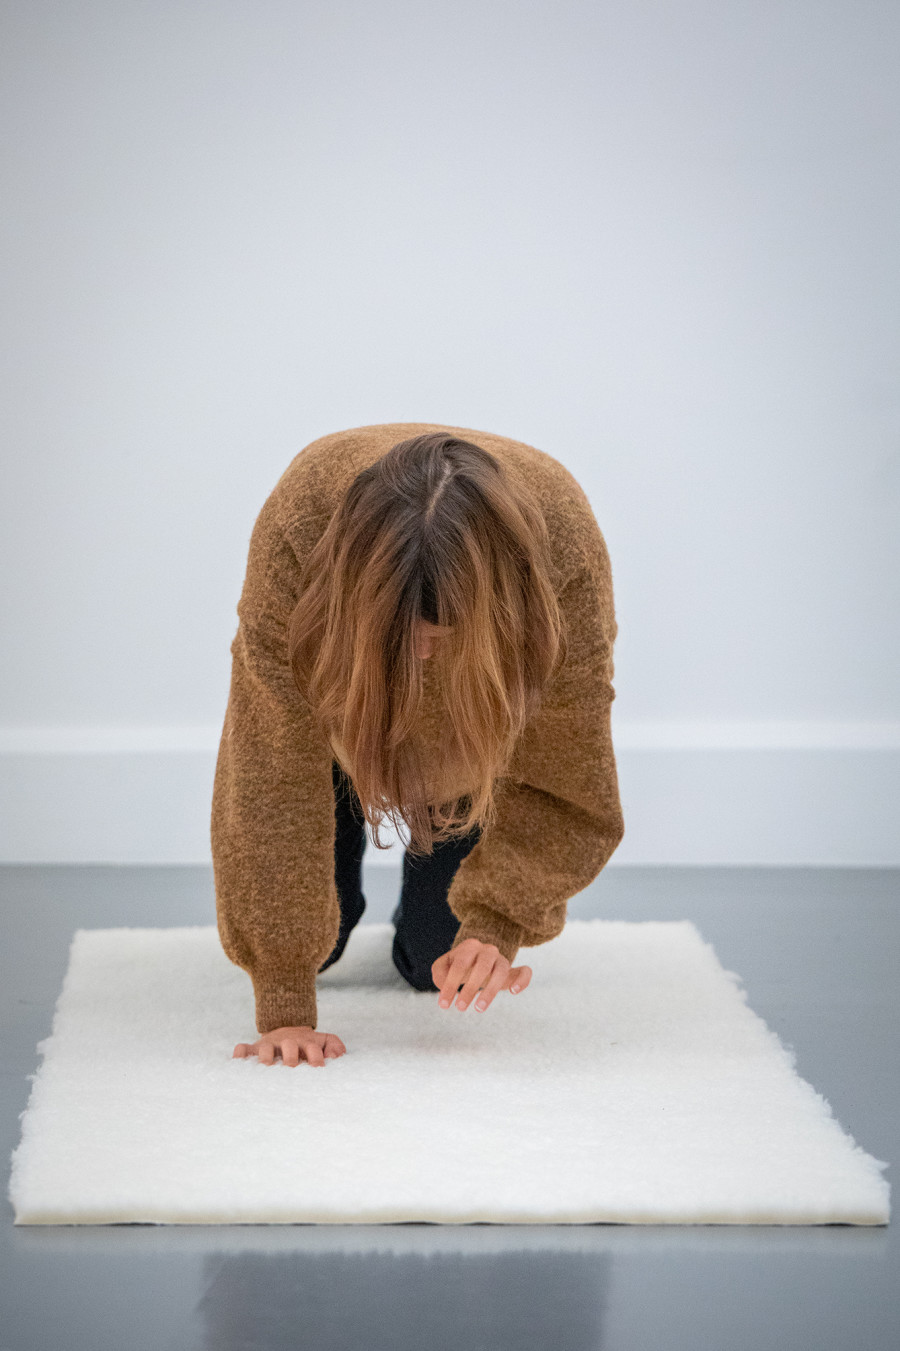 Feldenkrais lesson with works by Stanley Brouwn and Bruce Nauman, Collection Van Abbemuseum, Eindhoven, 2019, photo: Marcel de Buck